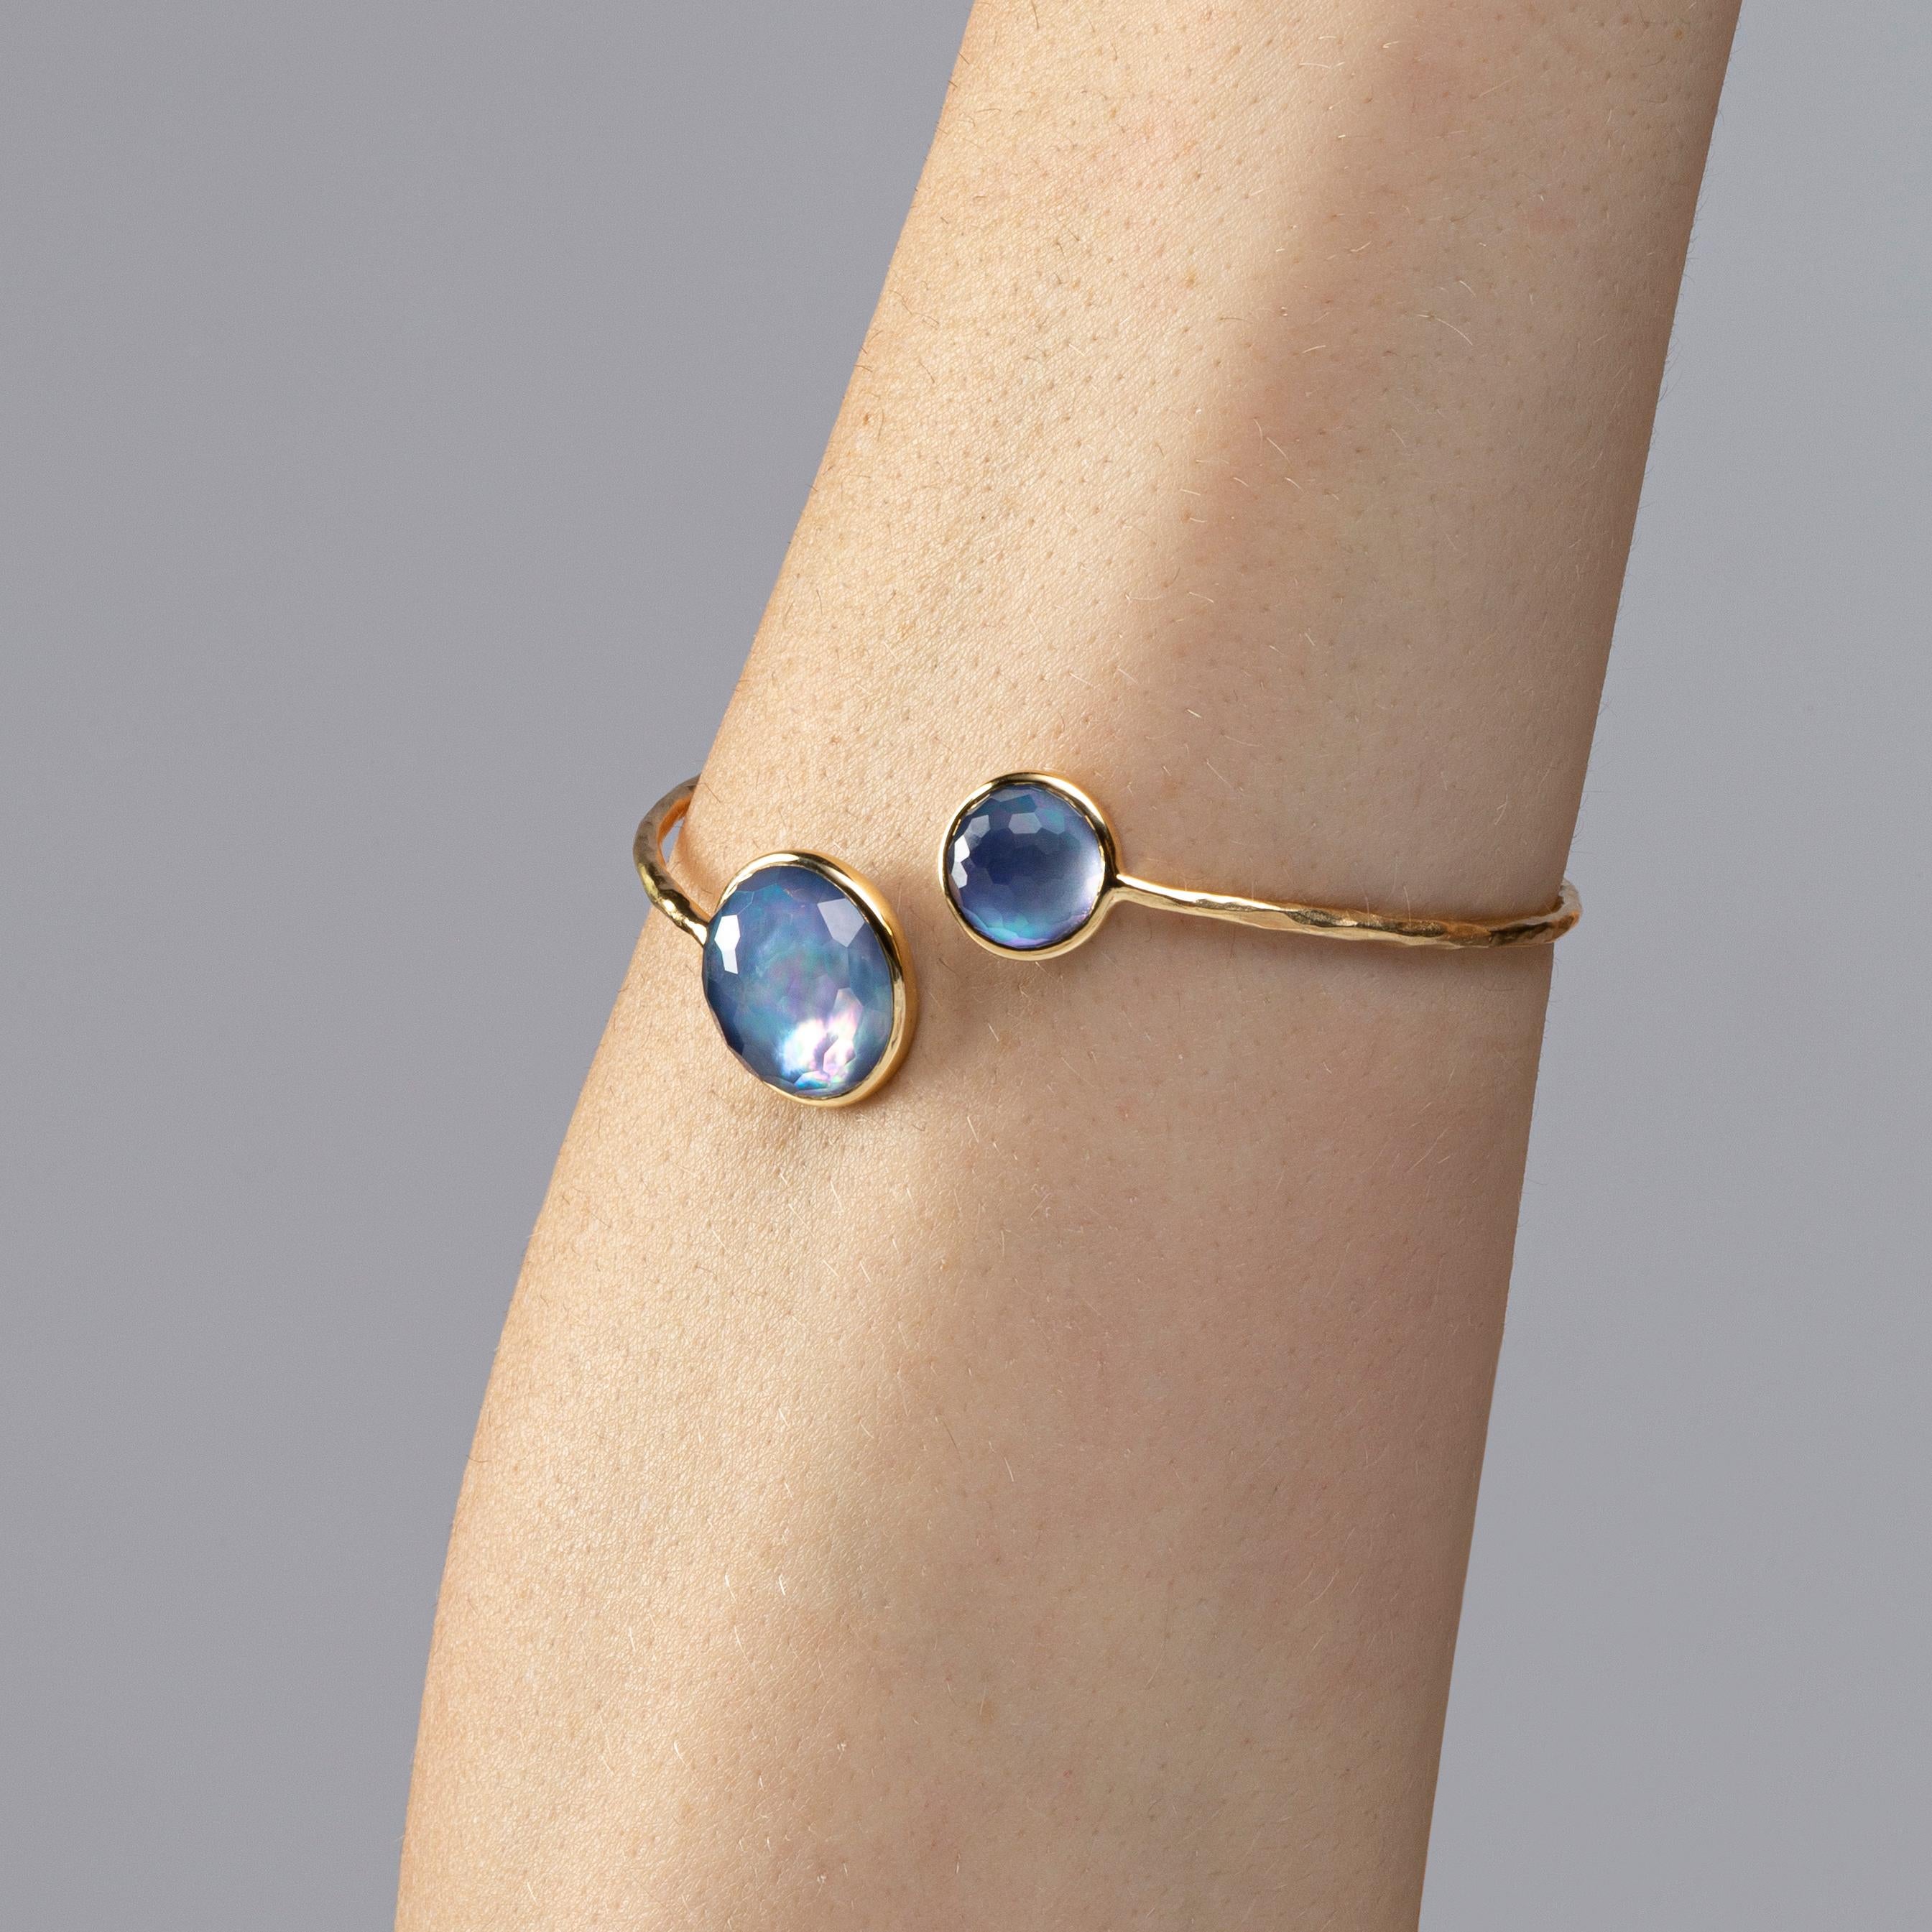 Alex Jona design collection, hand crafted in Italy, 18 Karat rose gold, crazy cut rock crystal over lapis lazuli bangle bracelet, weighing 12.35 carats in total. Can be sized to any specification.
Dimensions:
Large stone diameter: 0.66